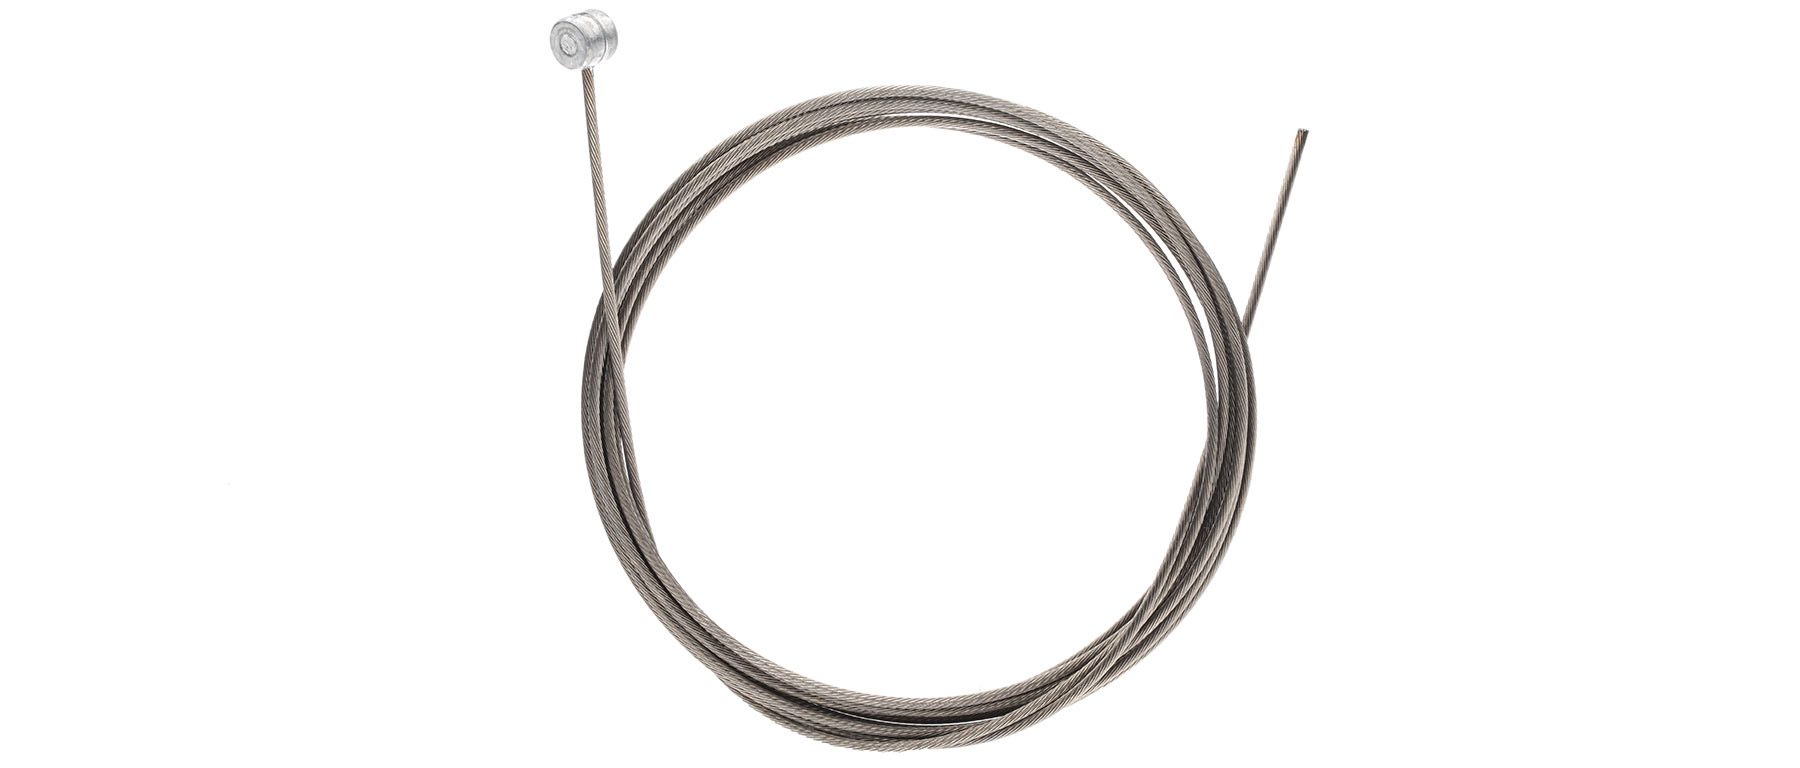 Shimano Stainless Steel MTB Brake Cable